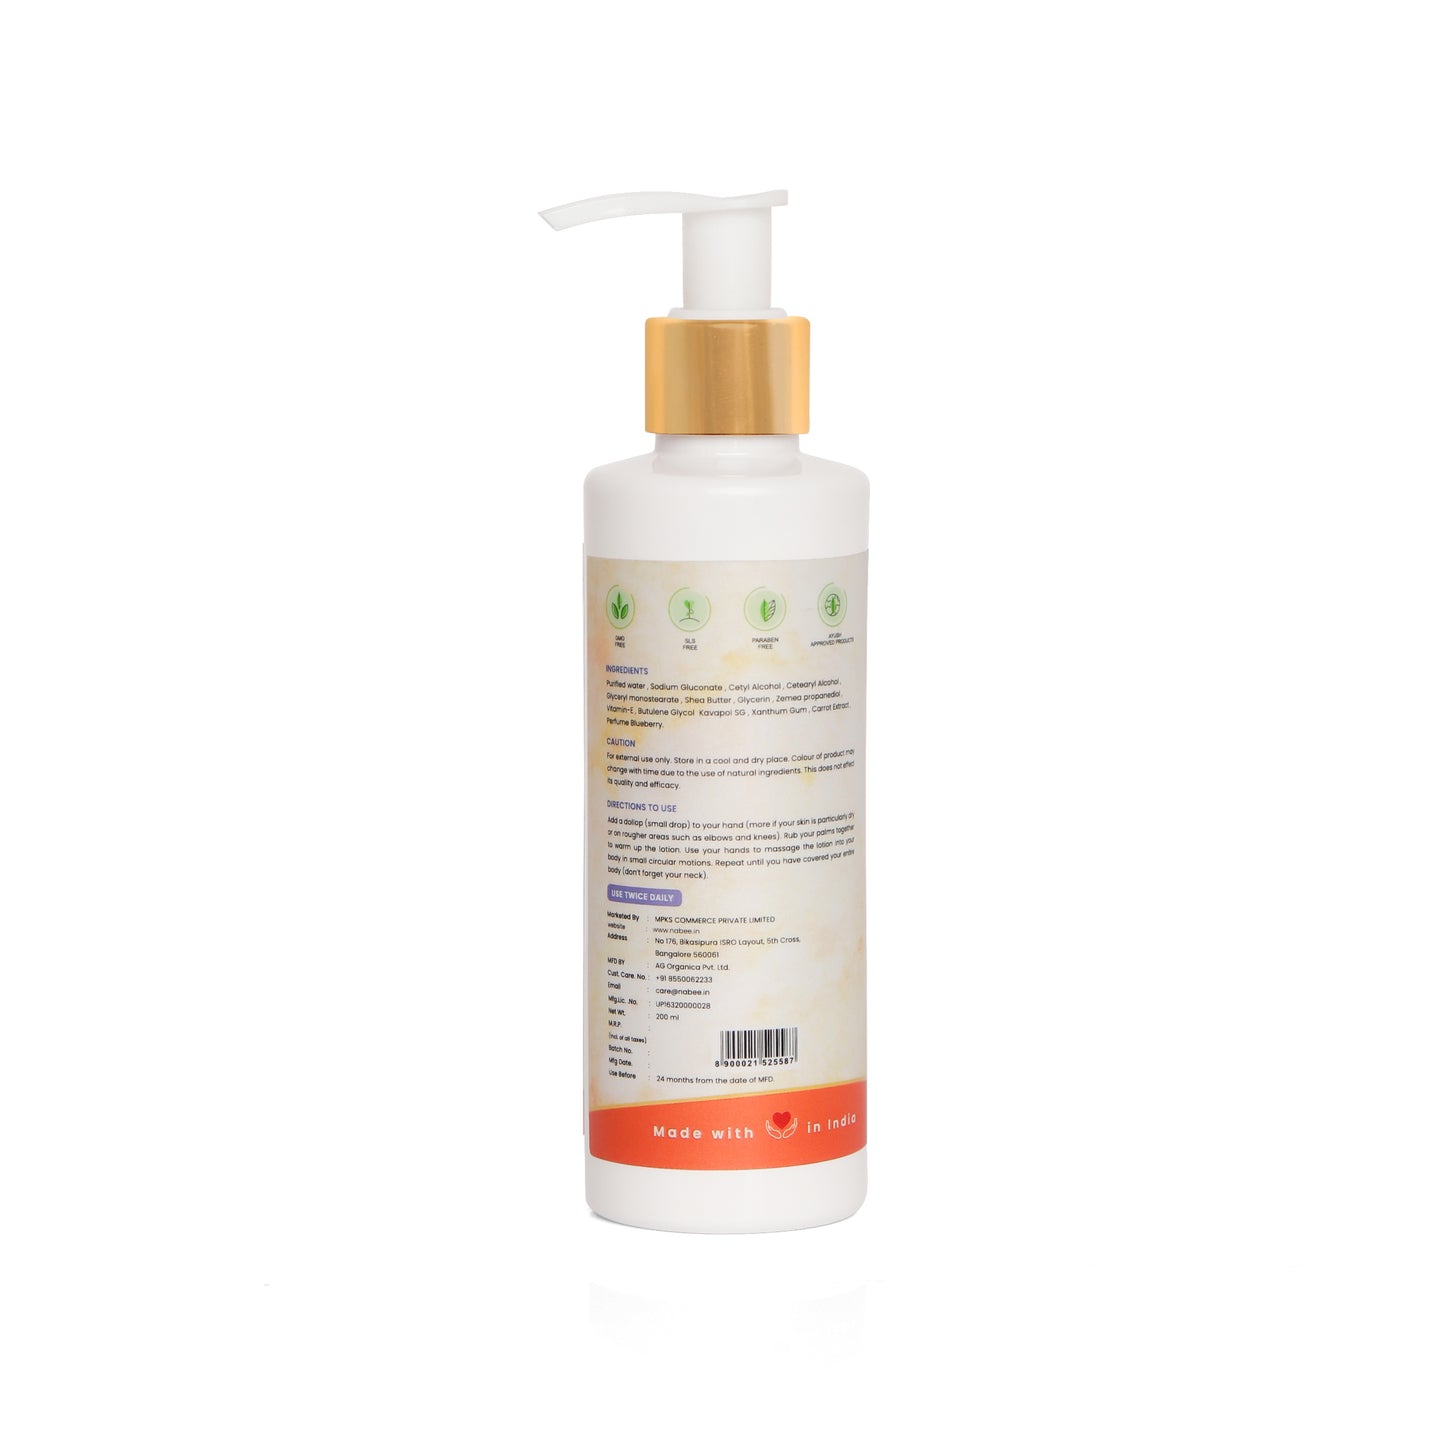 Blueberry & Carrot Body Lotion (200 ml)